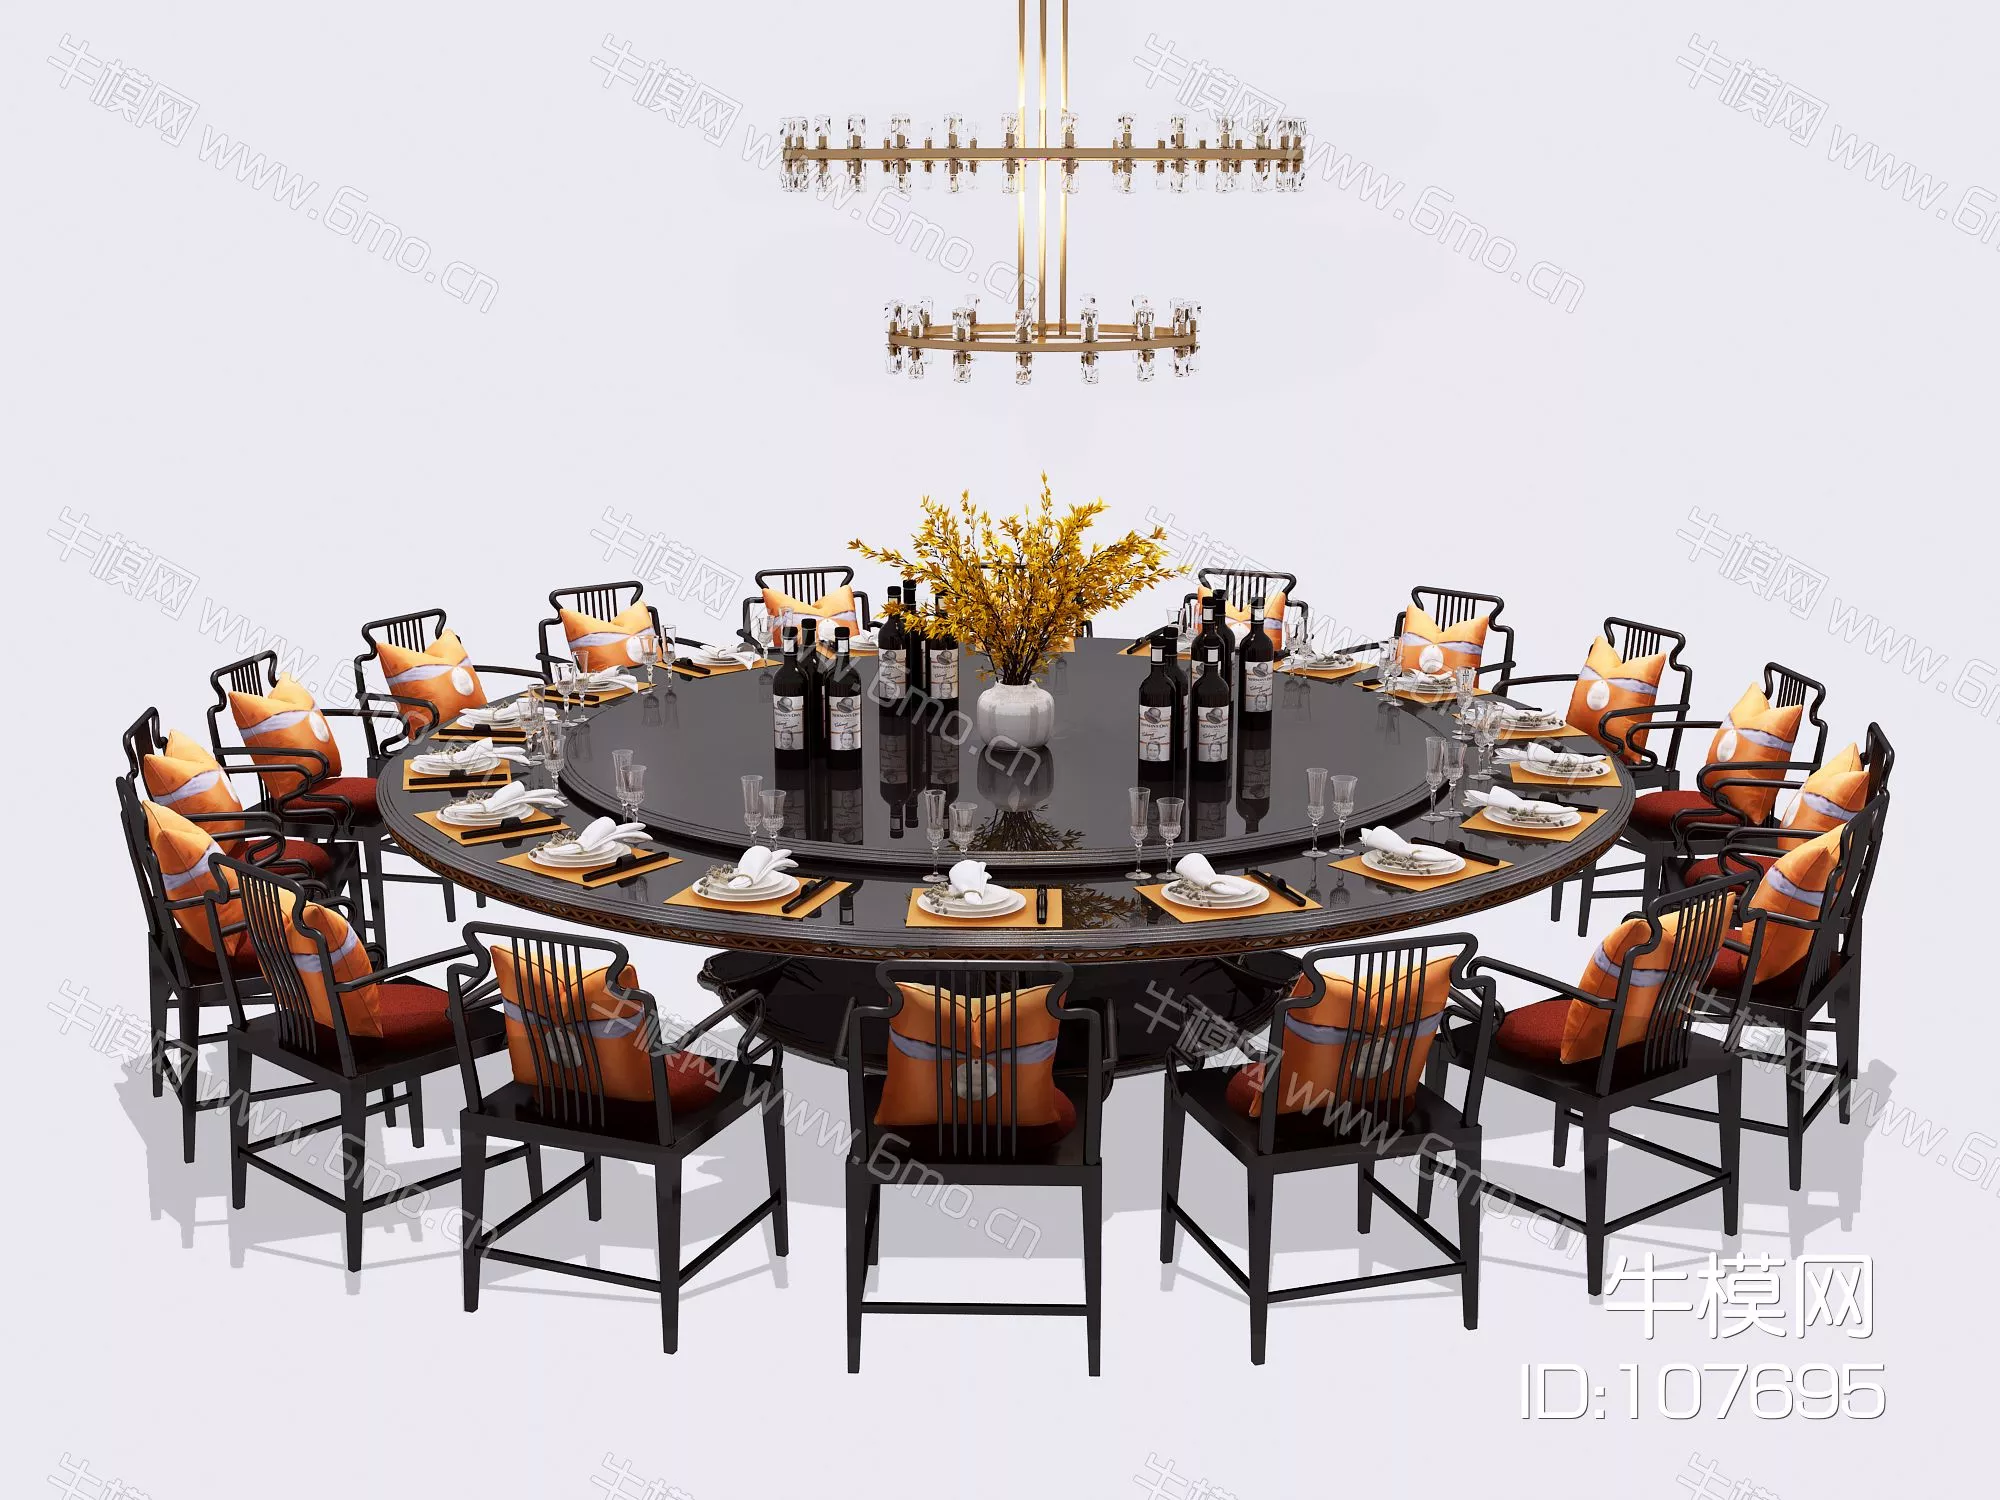 CHINESE DINING TABLE SET - SKETCHUP 3D MODEL - VRAY - 107695